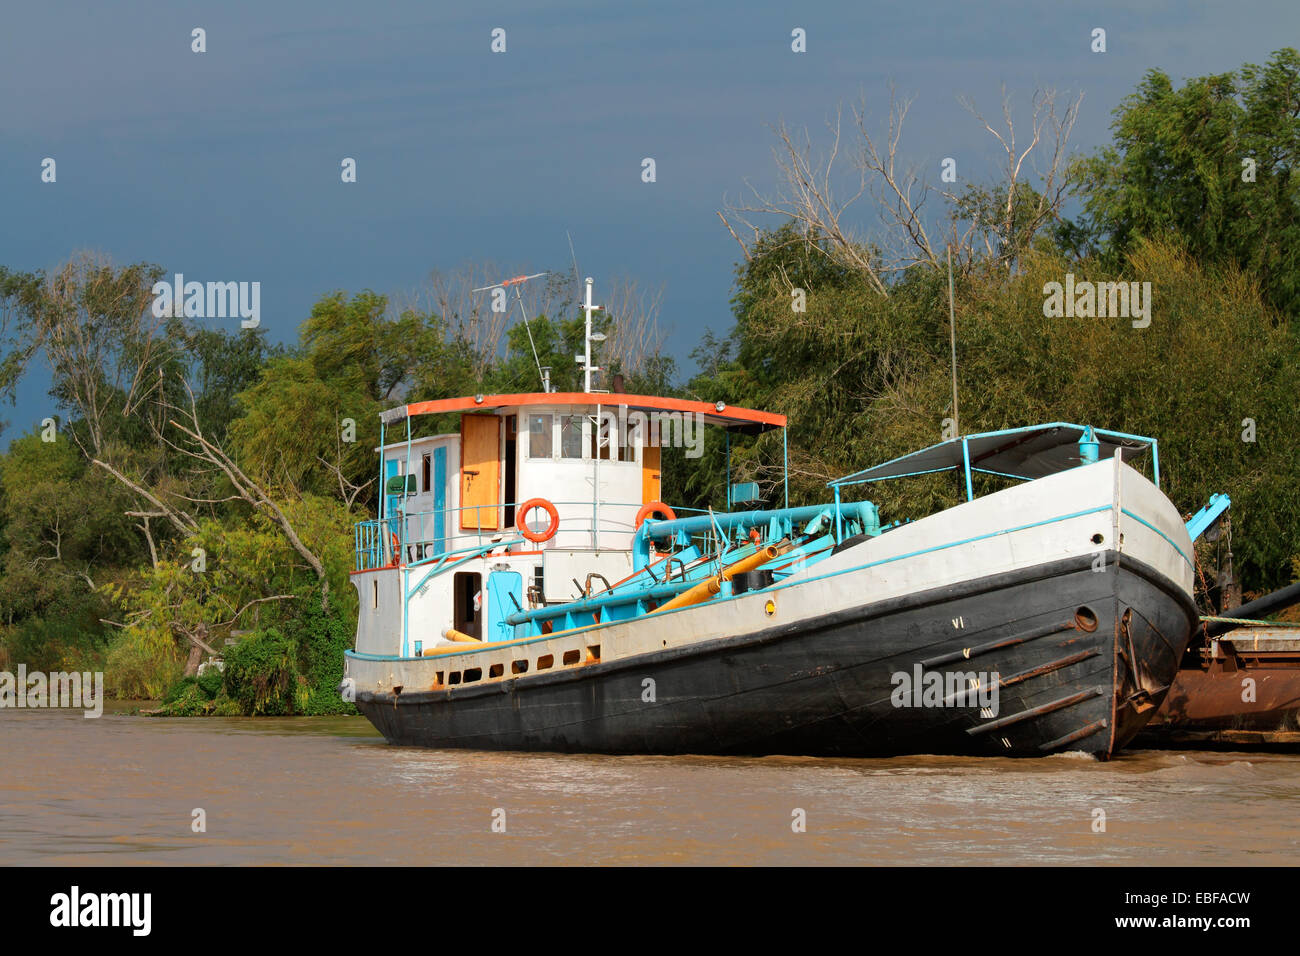 Boat anchored on the banks of the parana river, Rosario, Argentina Stock Photo